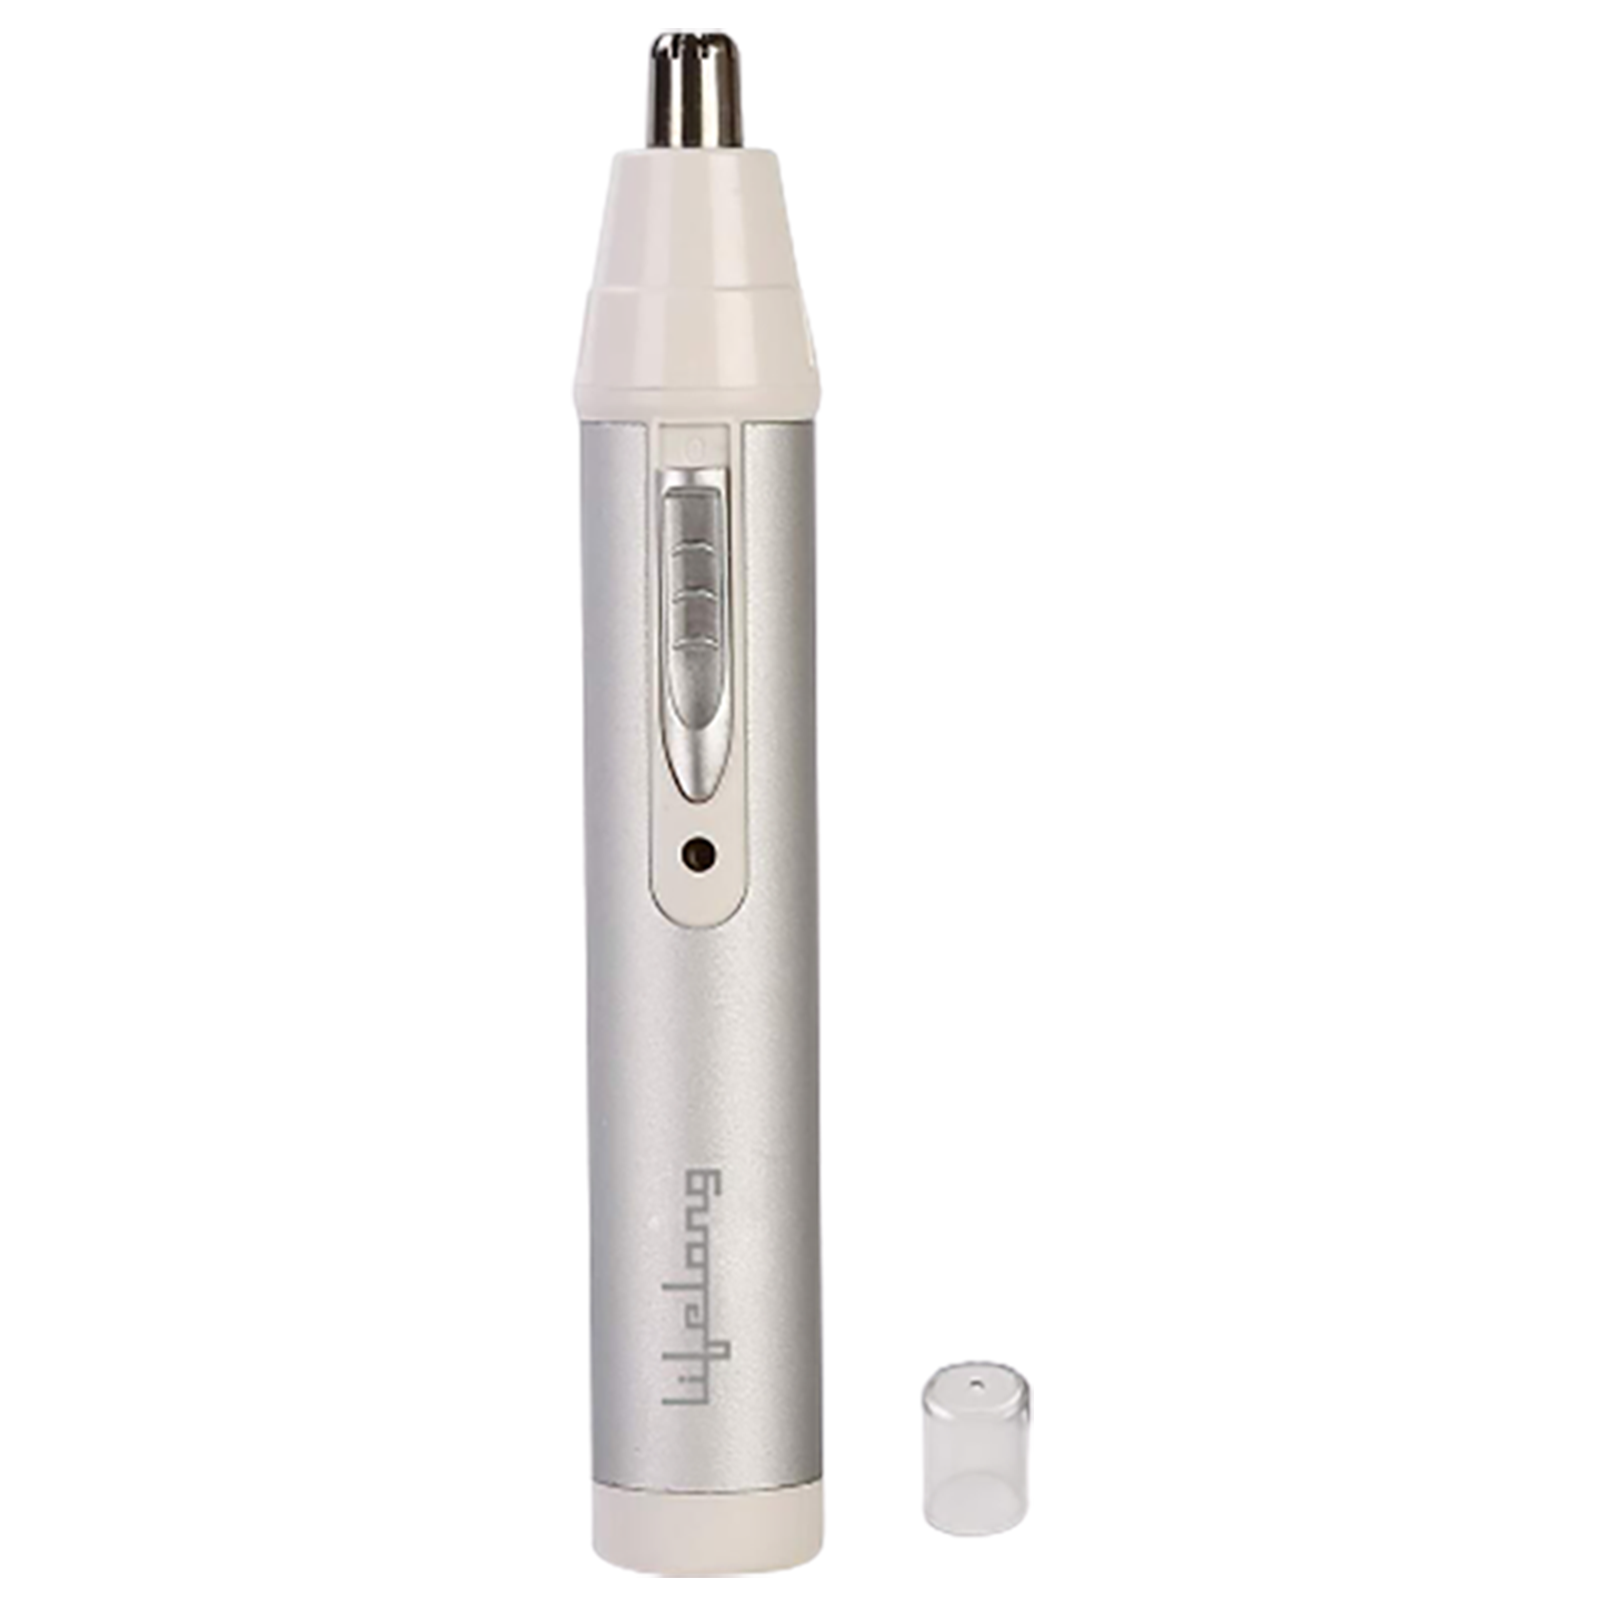 Lifelong LLPCM03 Rechargeable Cordless Dry Trimmer for Nose & Ear with 1 Length Settings for Men & Women (40mins Runtime, Rotary Blade System, Silver)